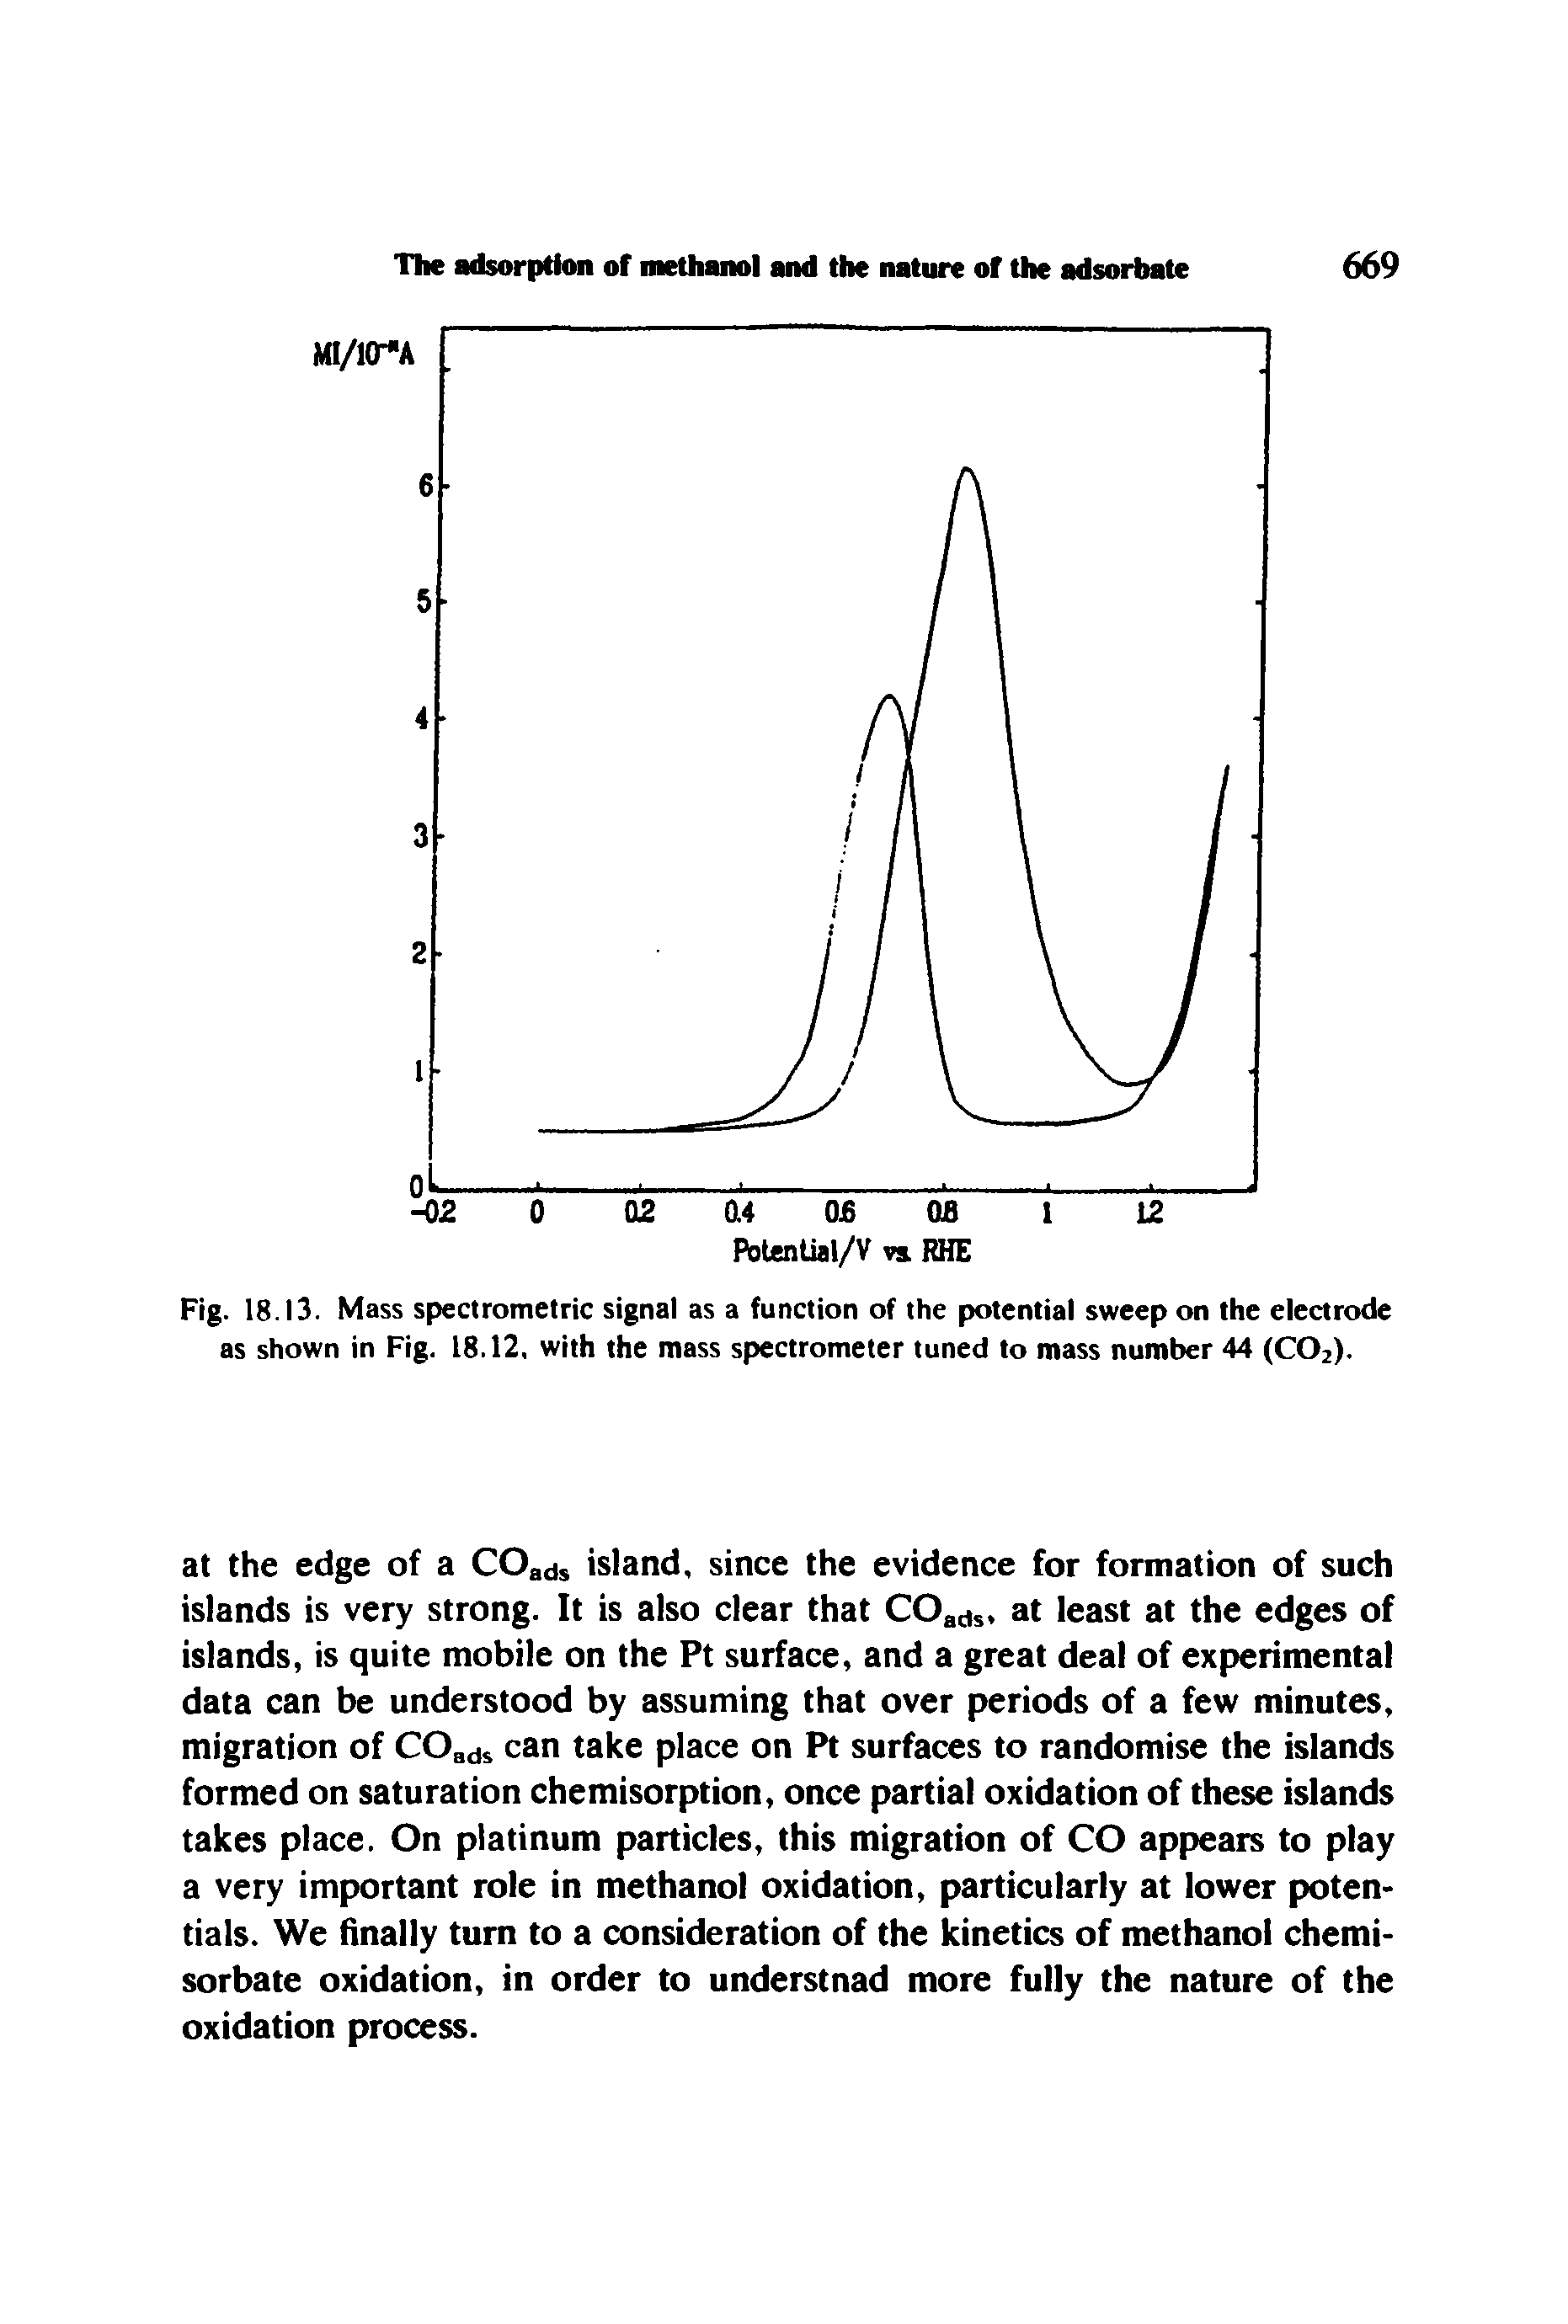 Fig. 18.13. Mass spectrometric signal as a function of the potential sweep on the electrode as shown in Fig. 18.12, with the mass spectrometer tuned to mass number 44 (C02).